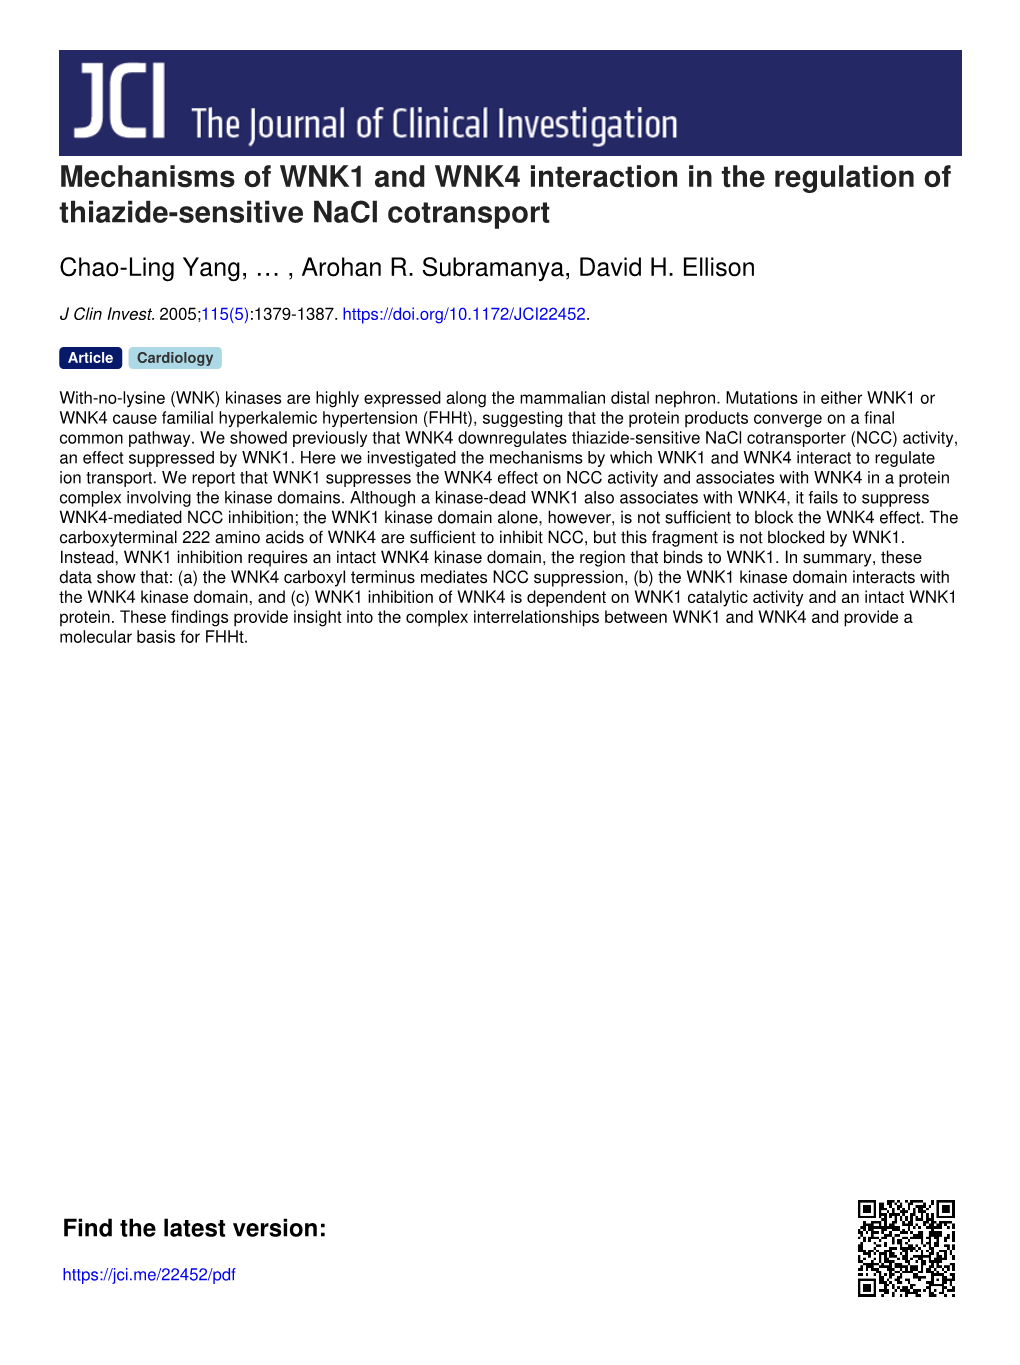 Mechanisms of WNK1 and WNK4 Interaction in the Regulation of Thiazide-Sensitive Nacl Cotransport